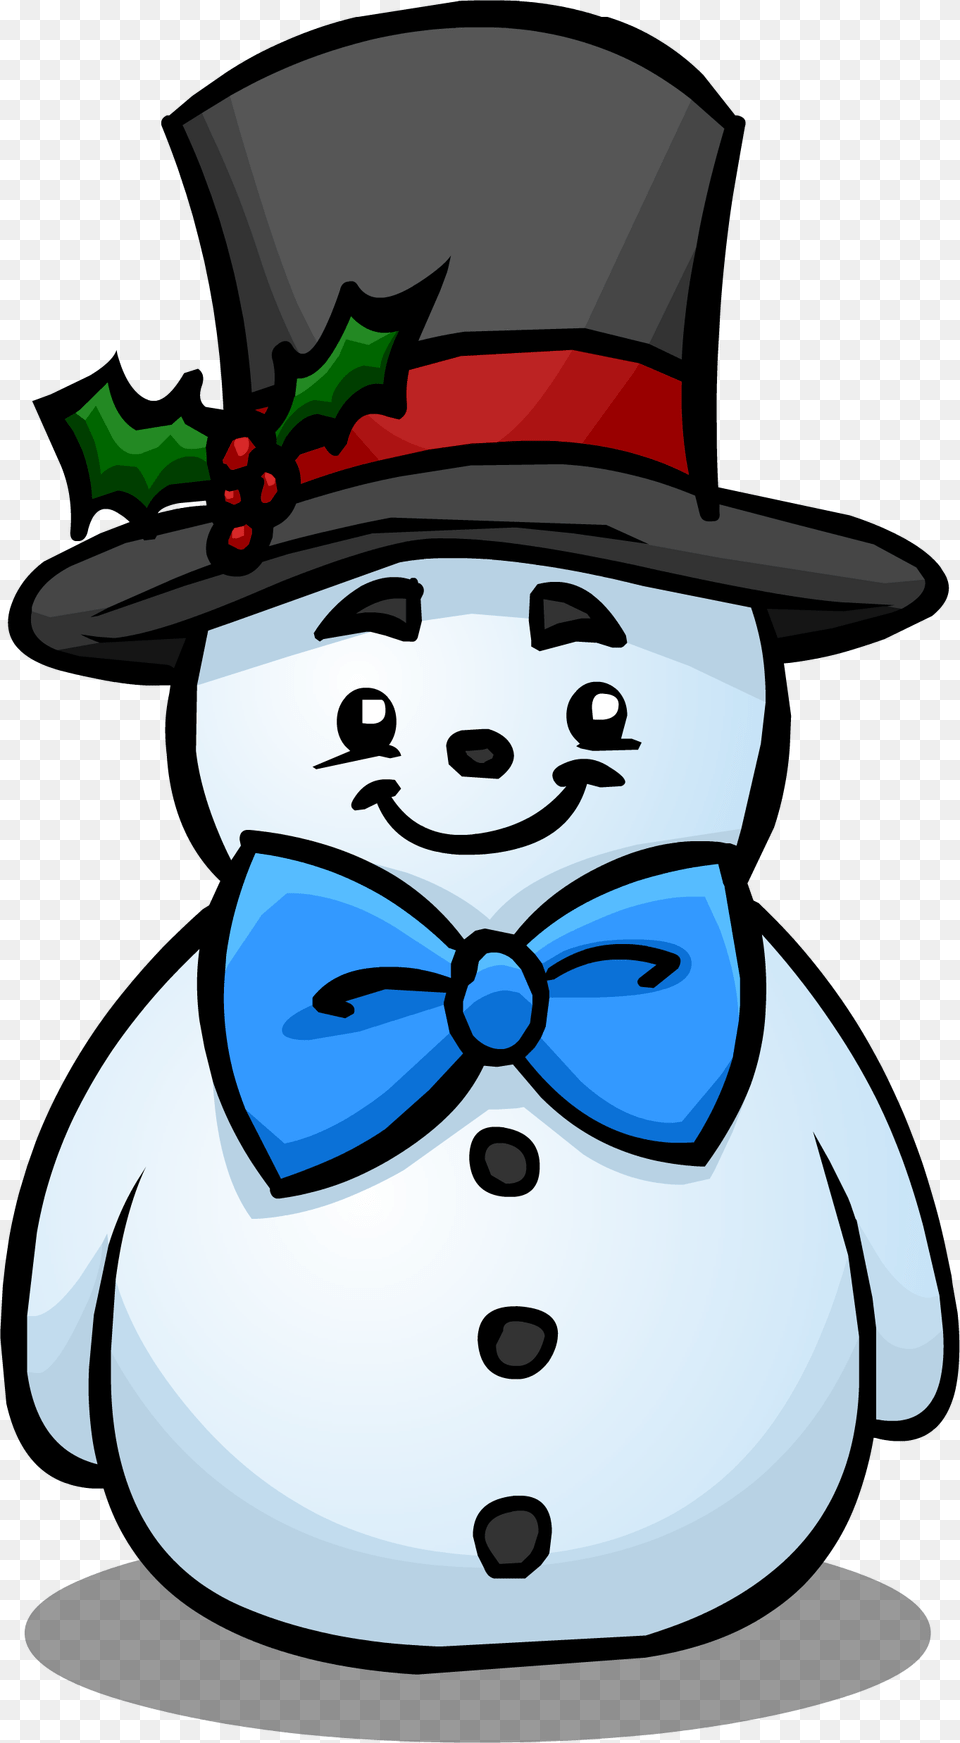 Top Snowman Club Penguin Top Hat For A Snowman, Accessories, Tie, Winter, Outdoors Free Png Download